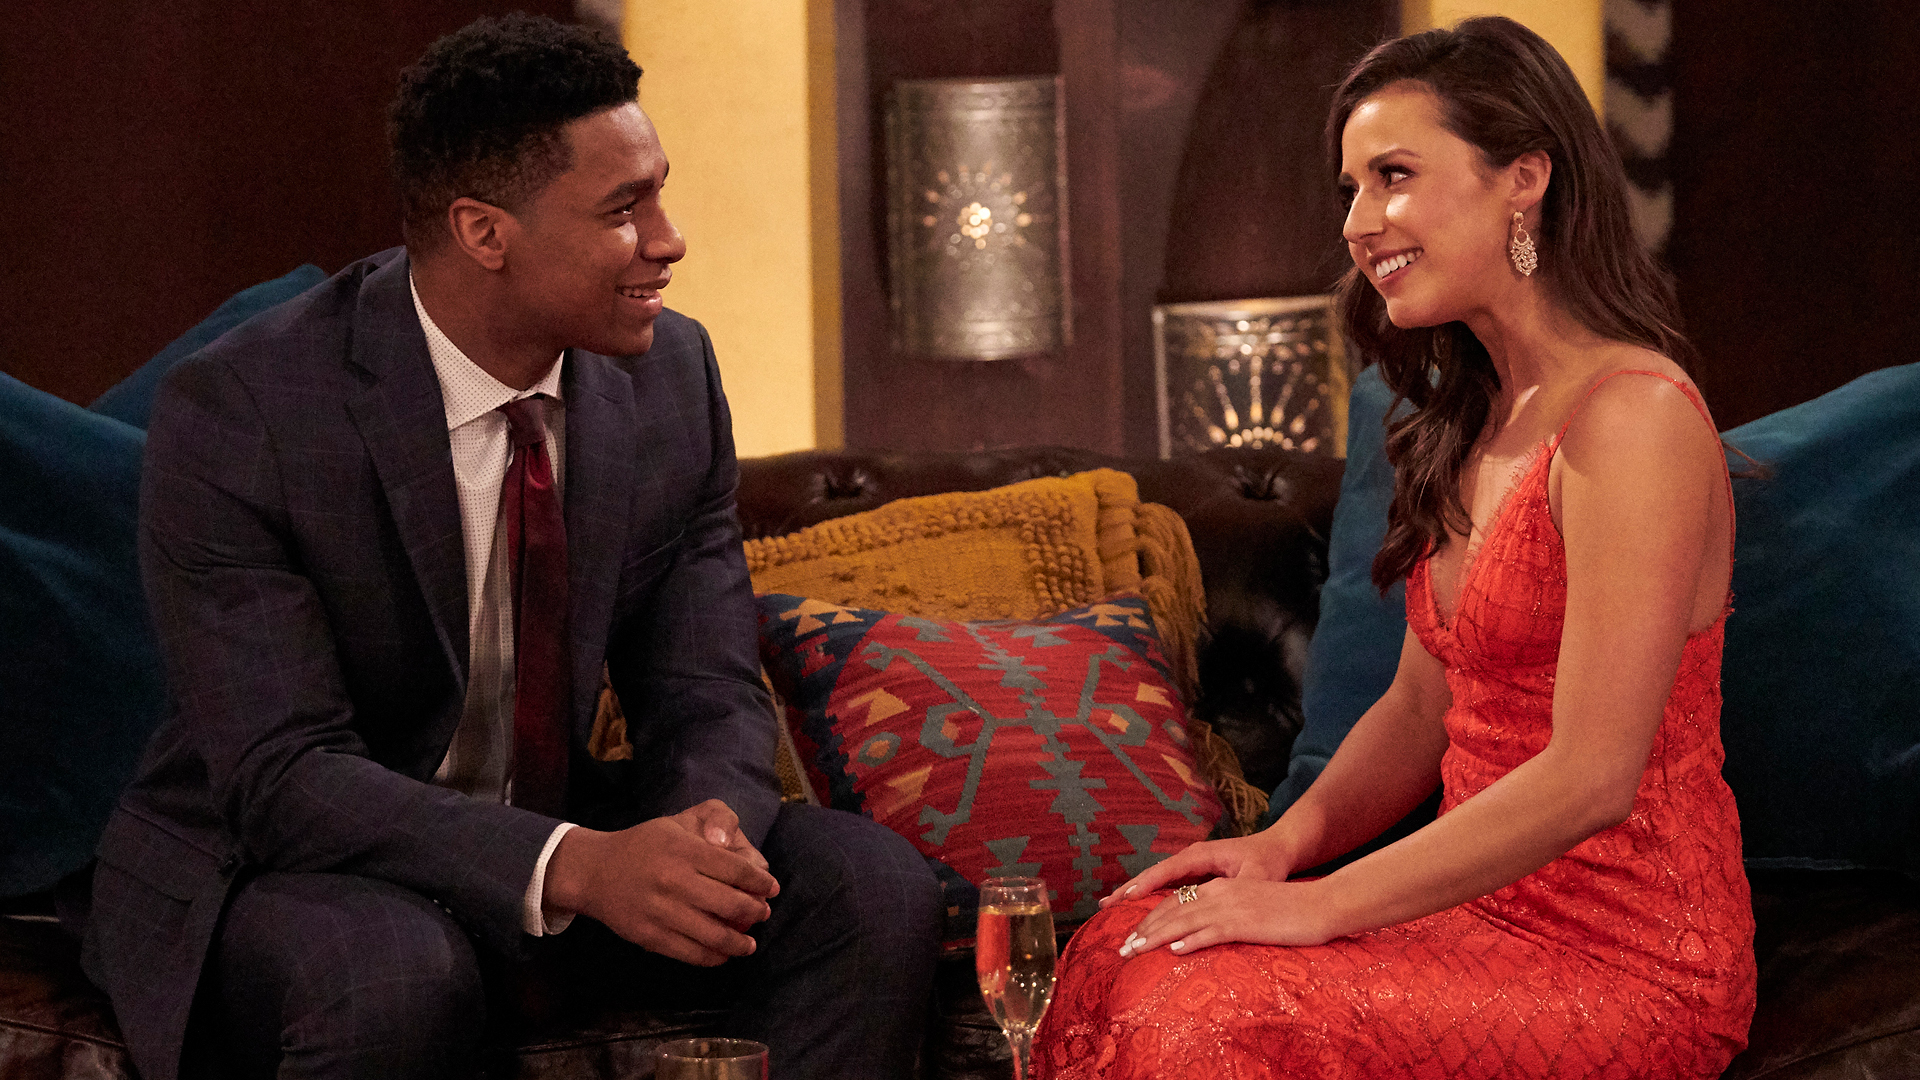 Andrew Spencer and Katie Thurston sit down together in ‘The Bachelorette’ Season 17 premiere